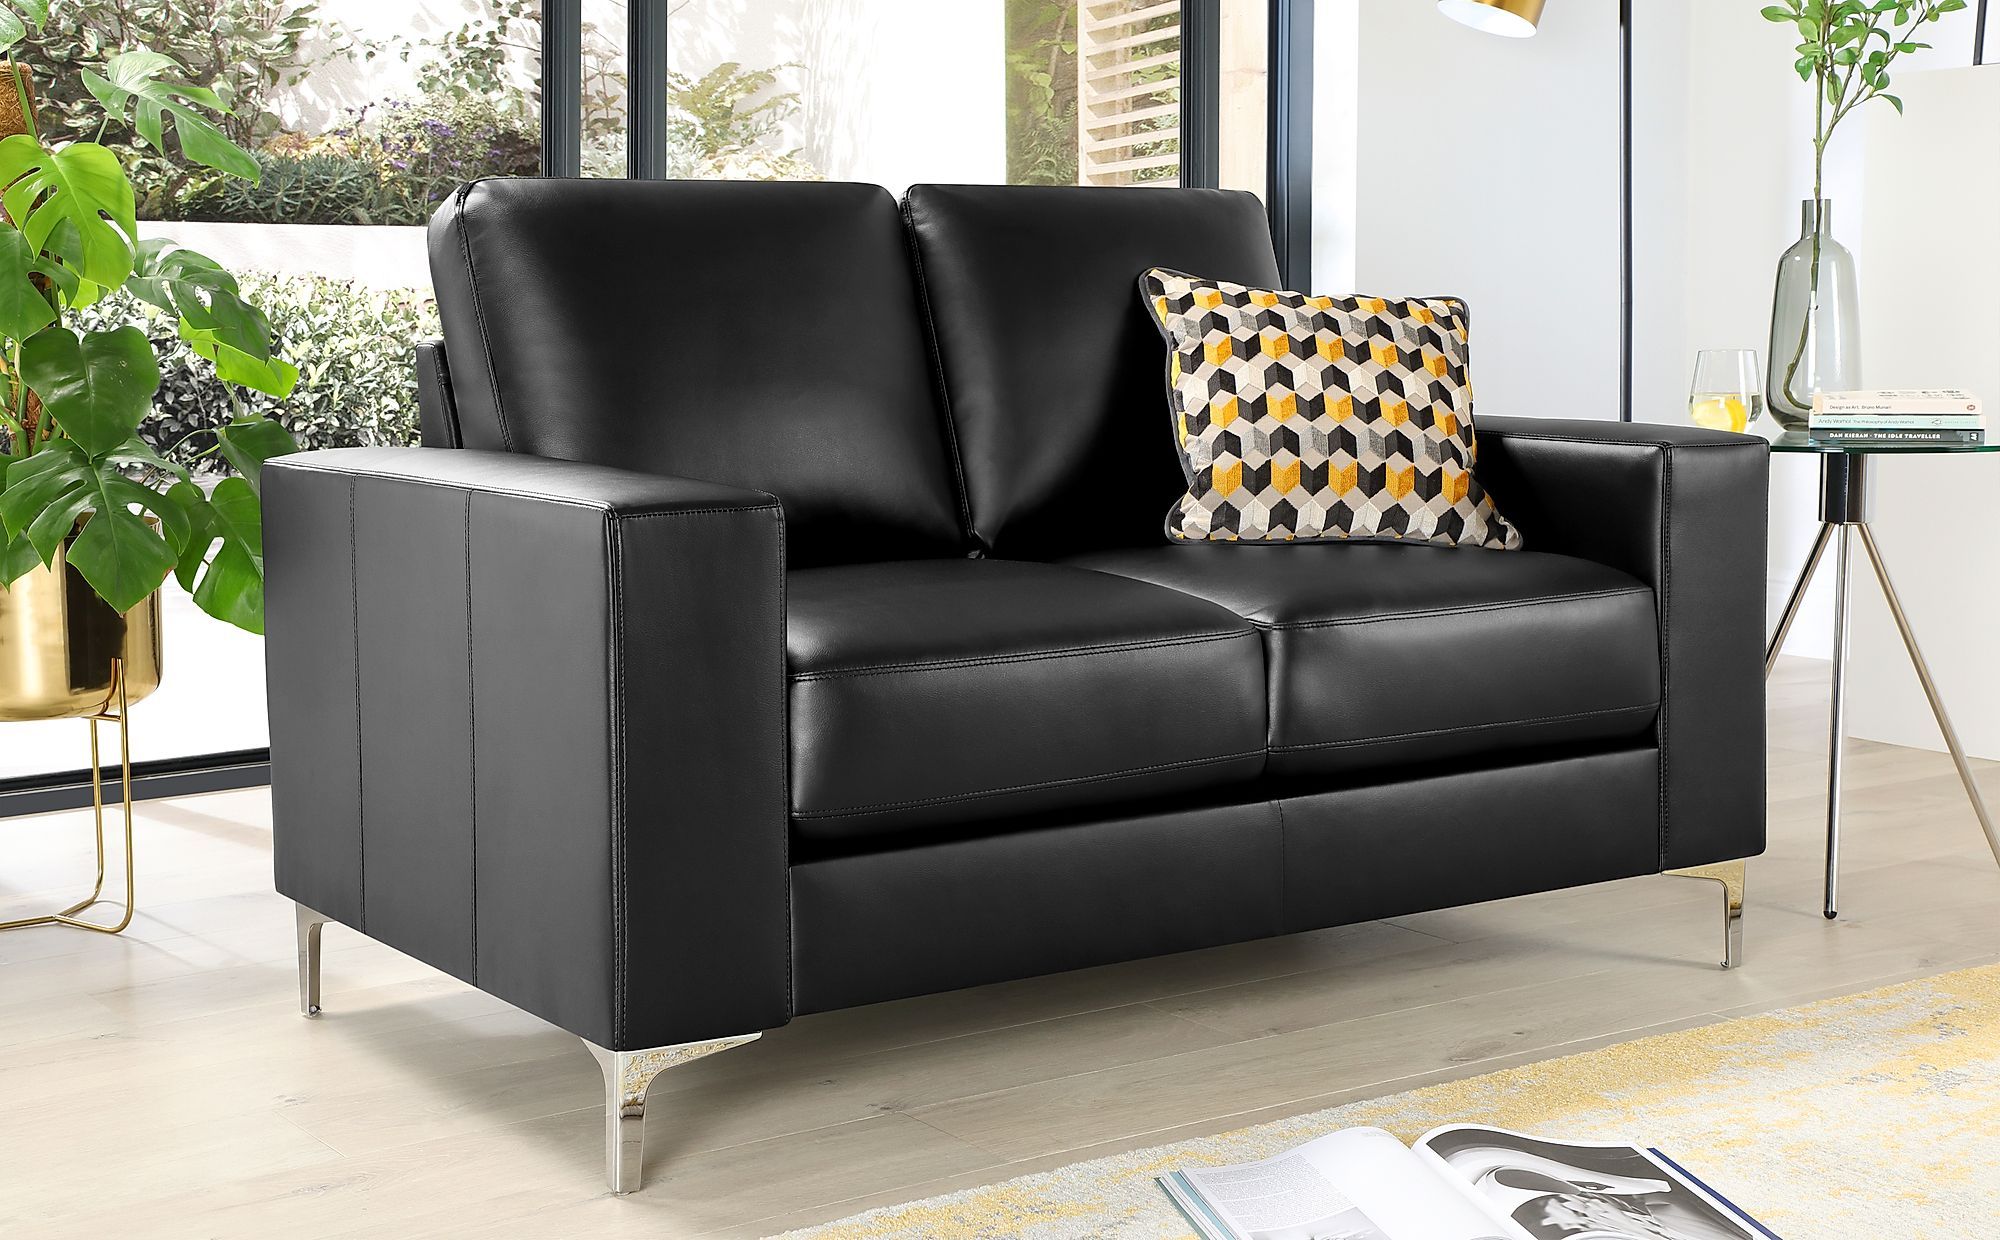 Baltimore Black Leather 2 Seater Sofa | Furniture Choice With Regard To 2 Seater Black Velvet Sofa Beds (Gallery 14 of 20)